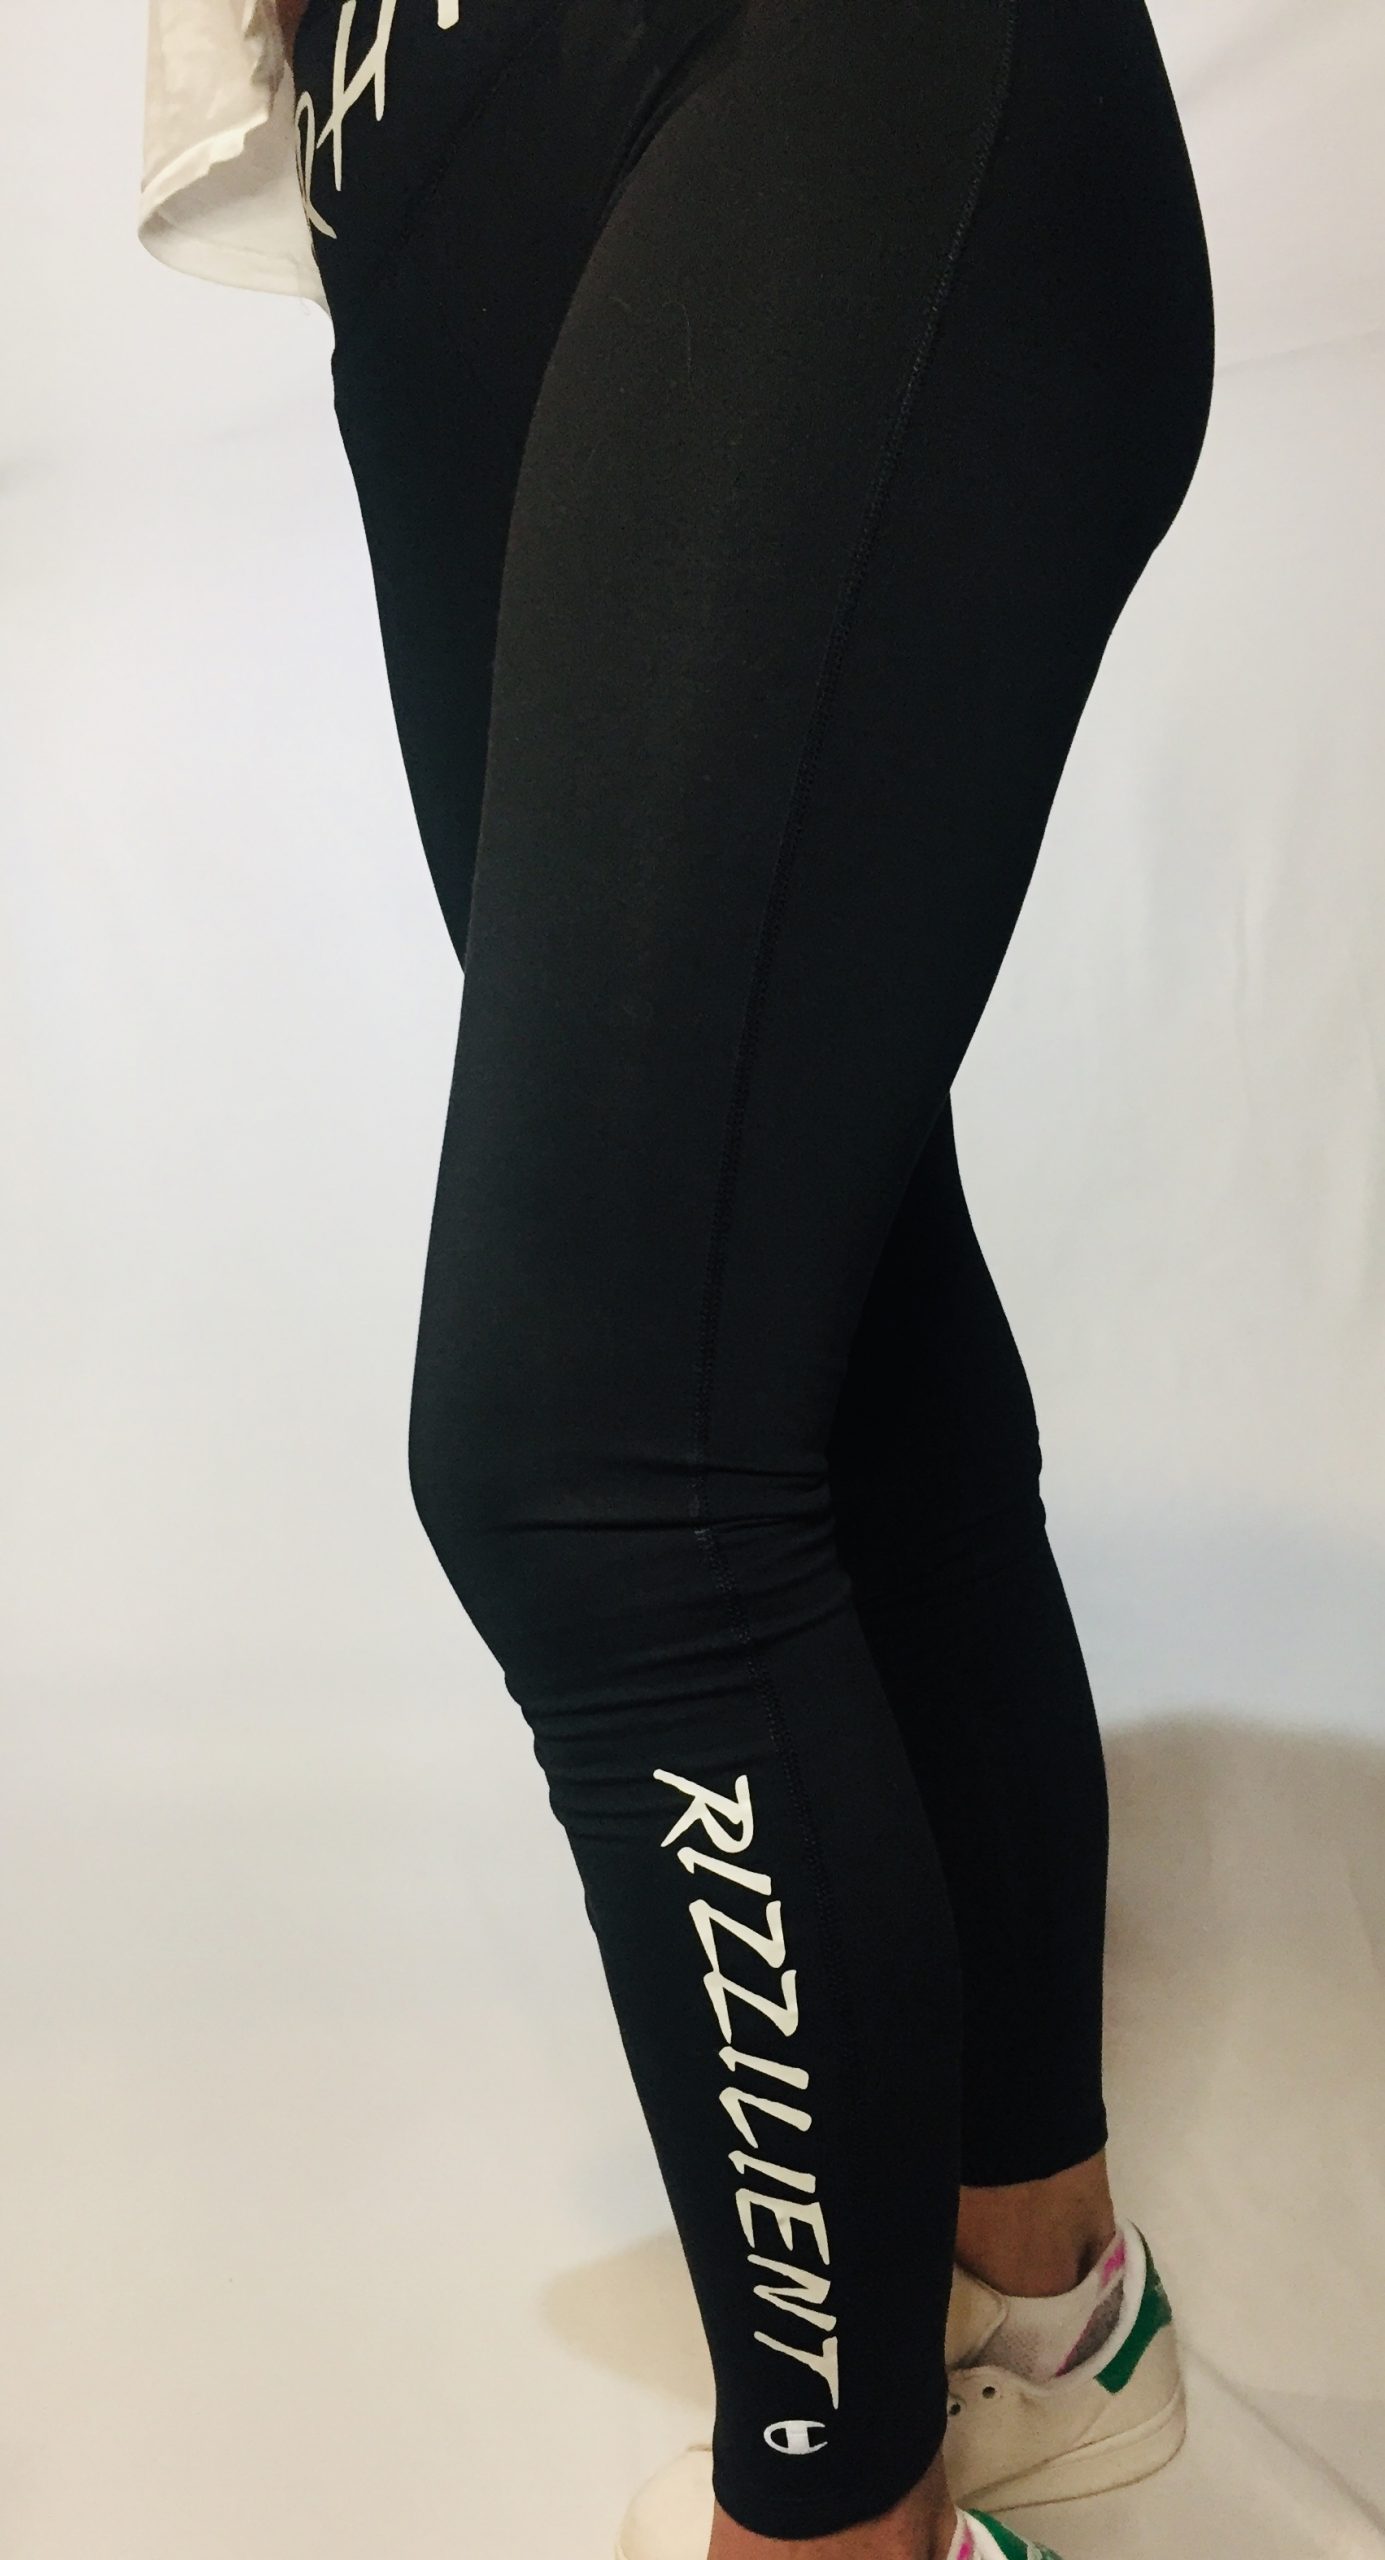 Womens Leggings Size Guide  International Society of Precision